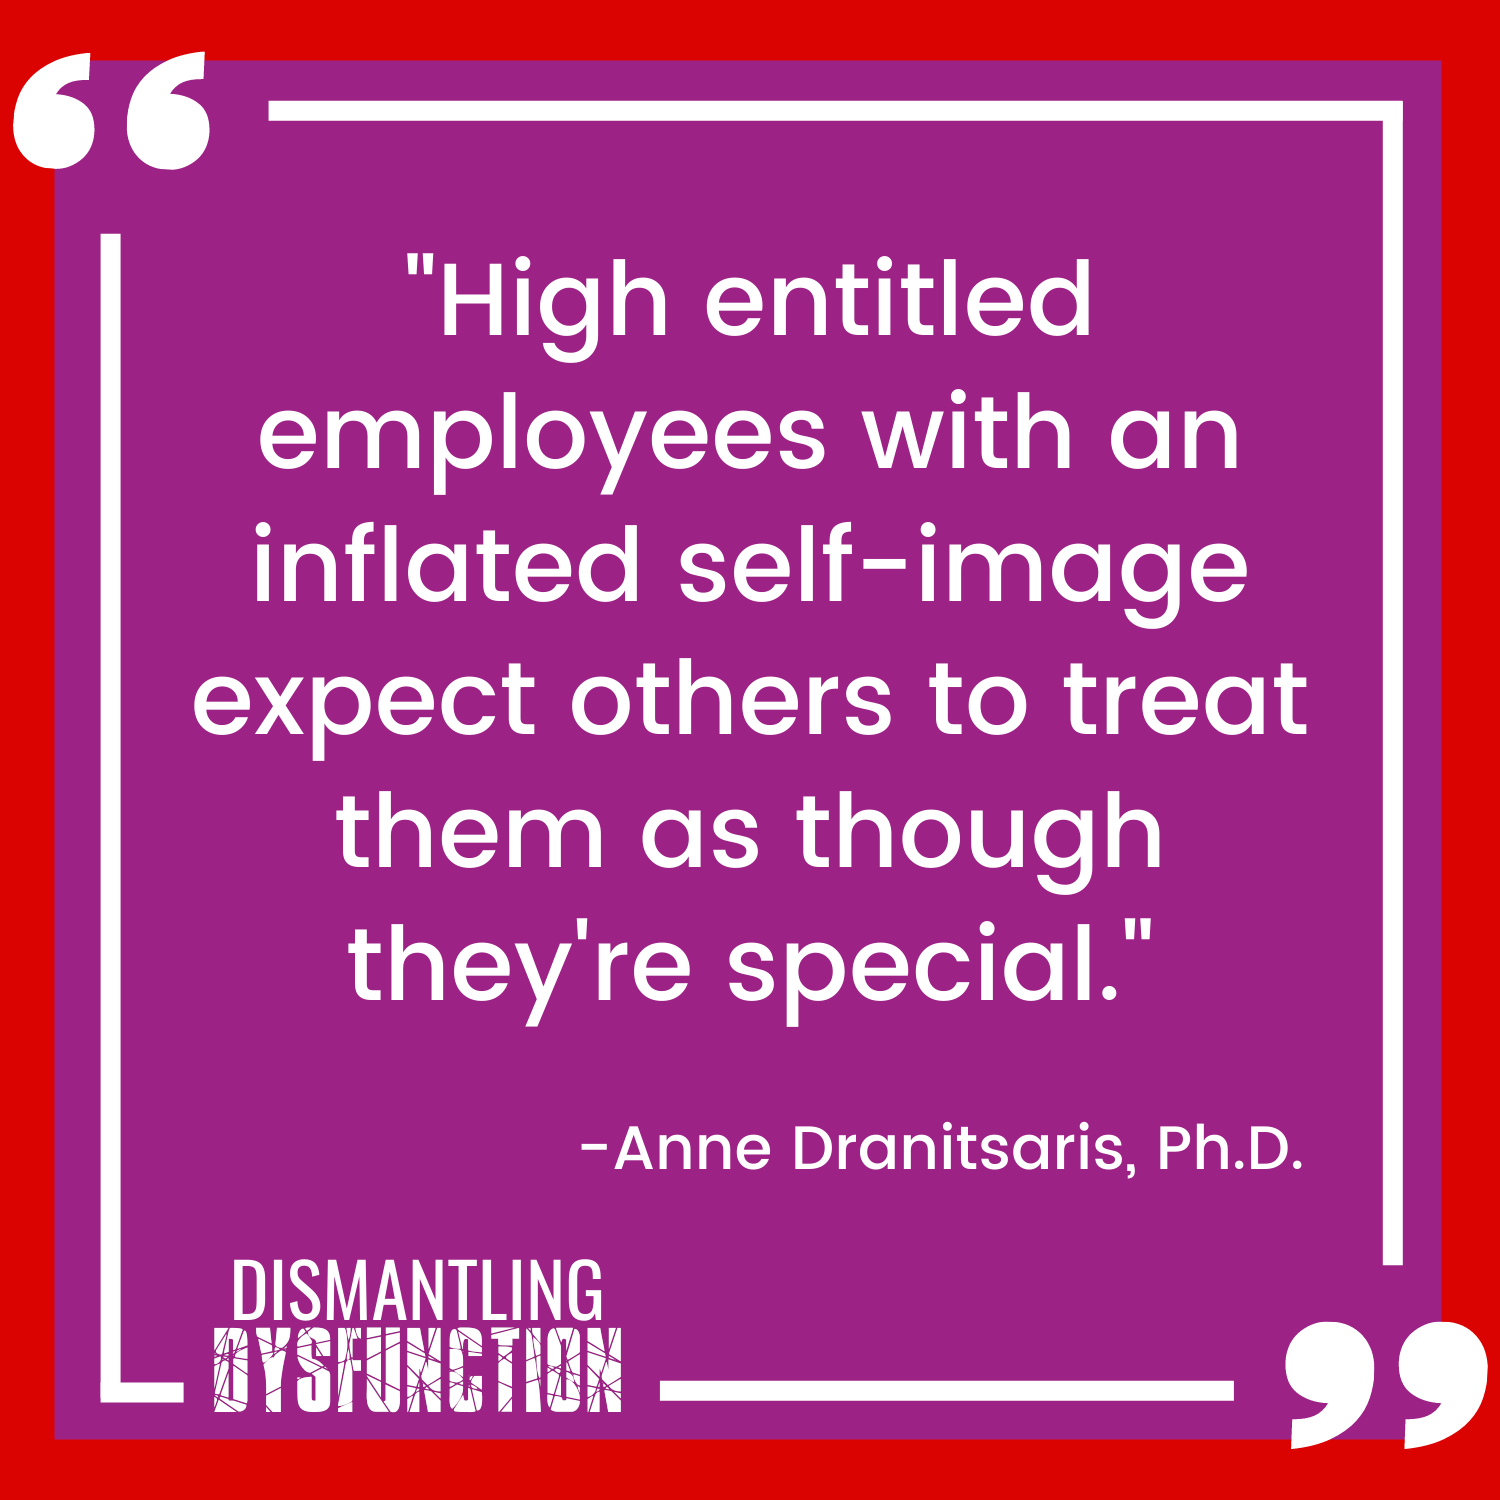 "High entitled employees with an inflated self-image expect others to treat them as though they're special."